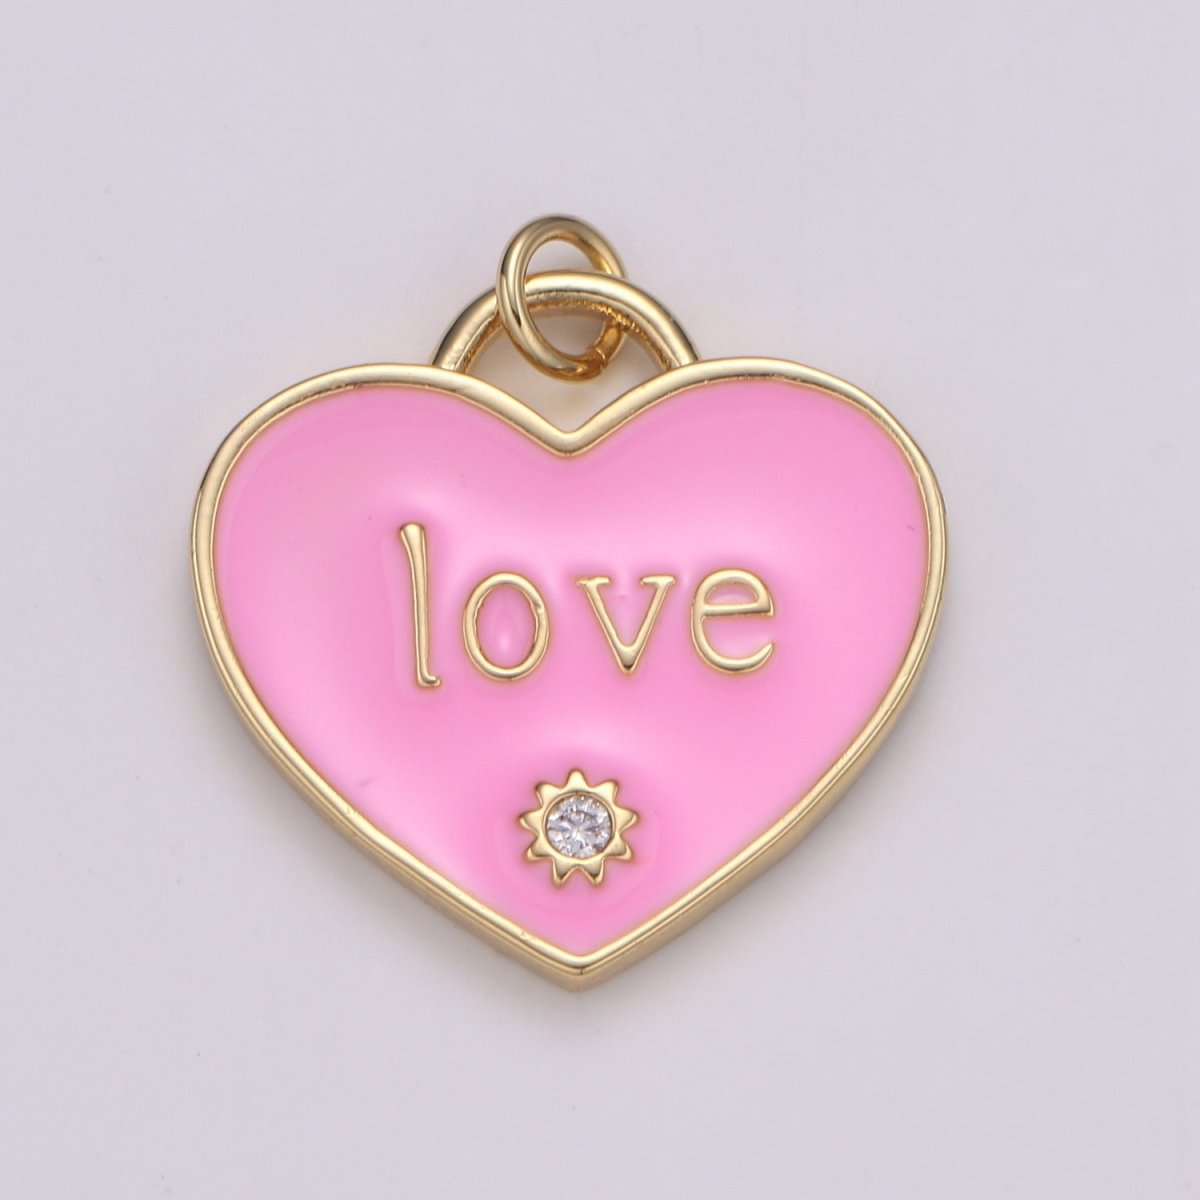 14K Gold Filled Heart Charm Pink Red Enamel Cz Charm Love Pendant For Jewelry Supply Wholesale Gift idea for Mother Day Gift C-119 - DLUXCA